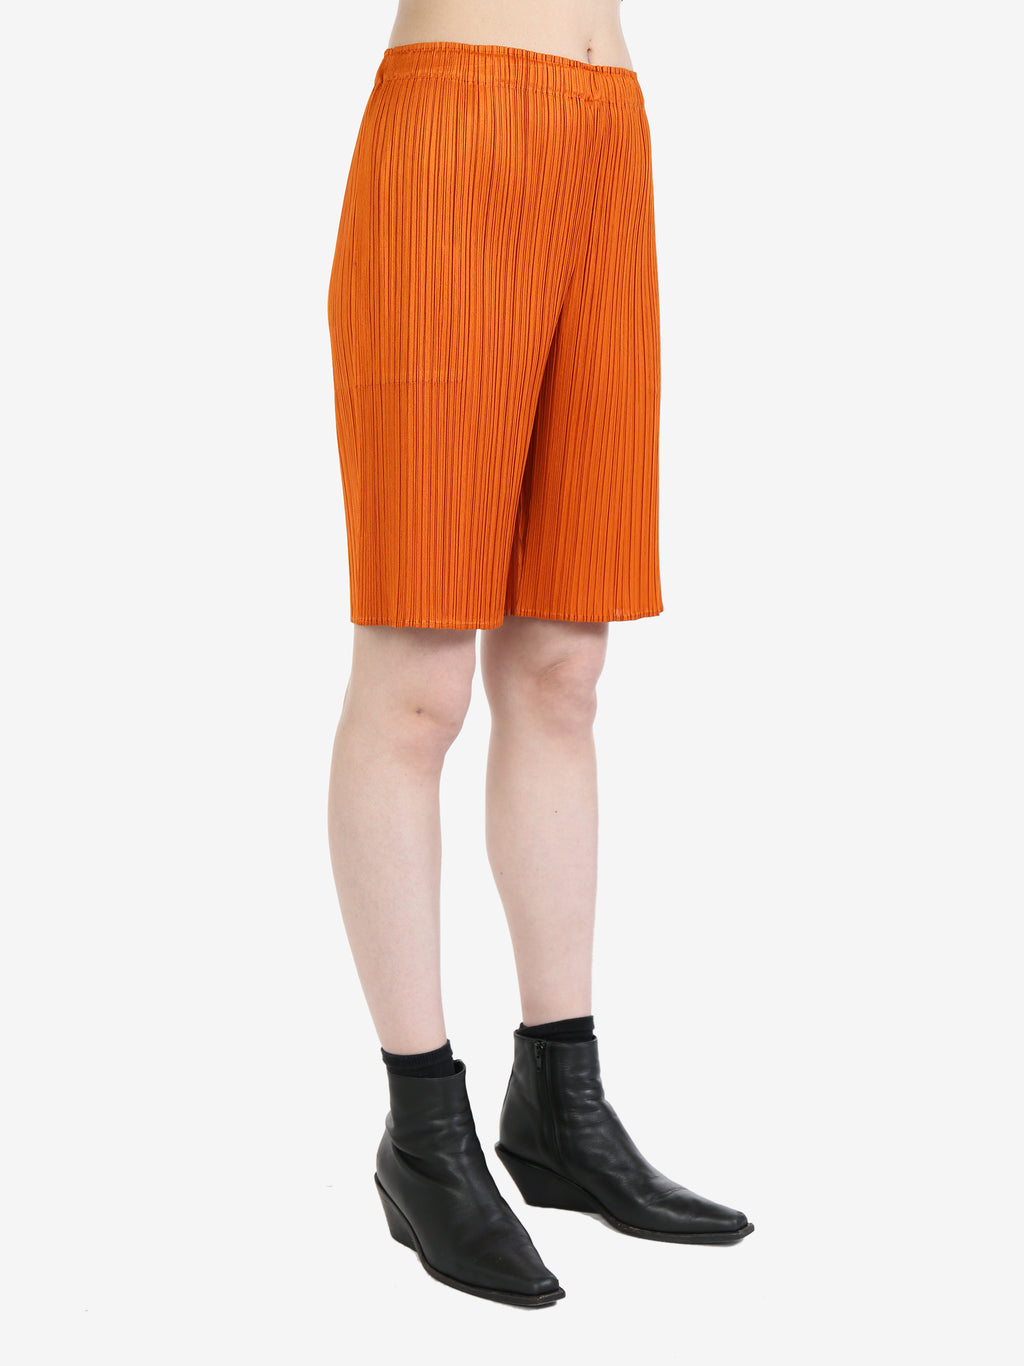 PLEATS PLEASE ISSEY MIYAKE Women Monthly Colors: April Pants